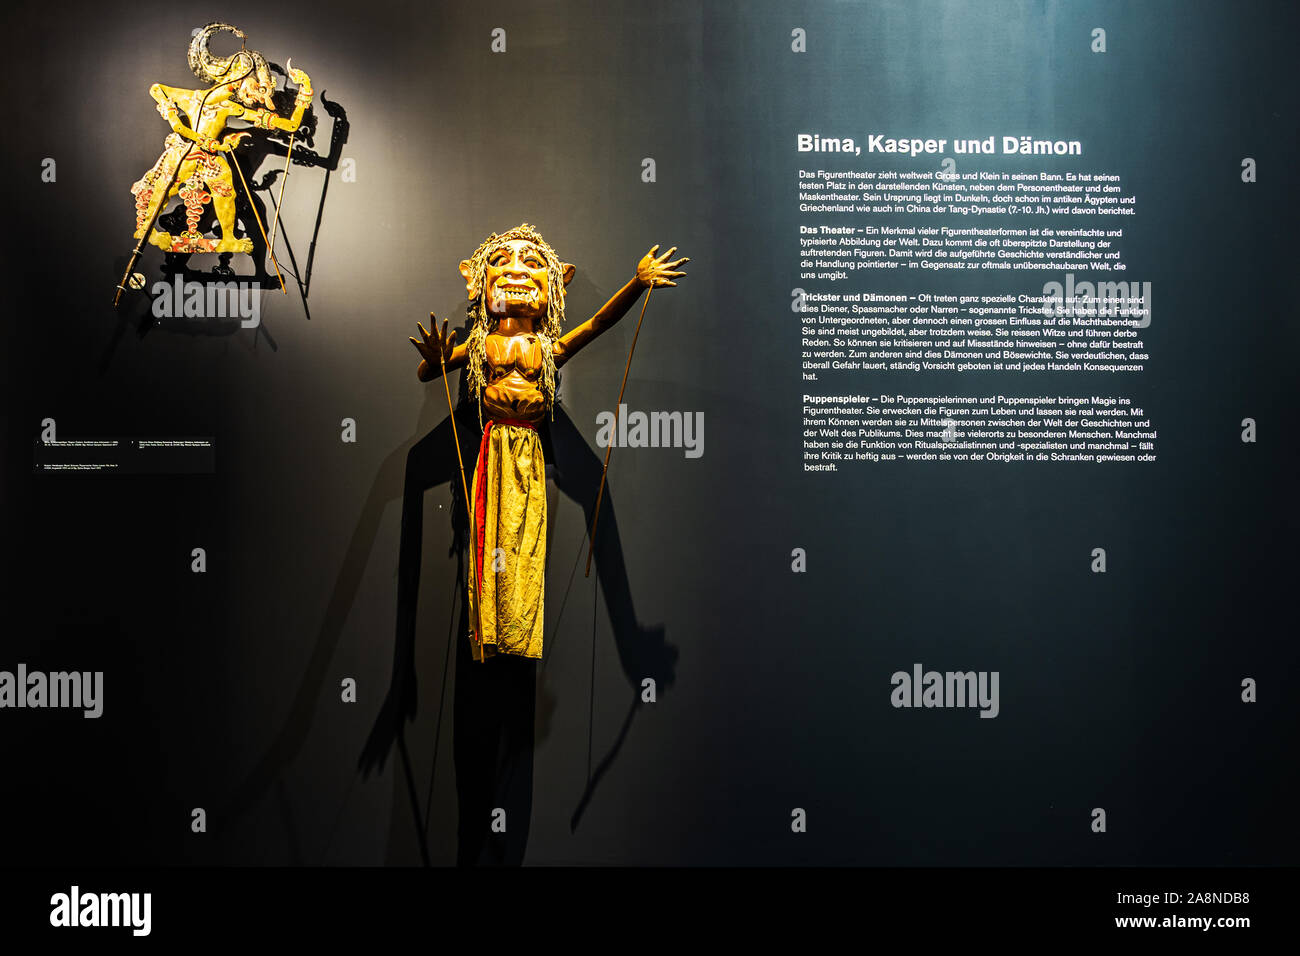 Rod Puppet representing the Demon Setang Doblang Semarang, West Java, Indonesia and Bhima, shadow play figure, Museum of Cultures exhibition, Basel, S Stock Photo